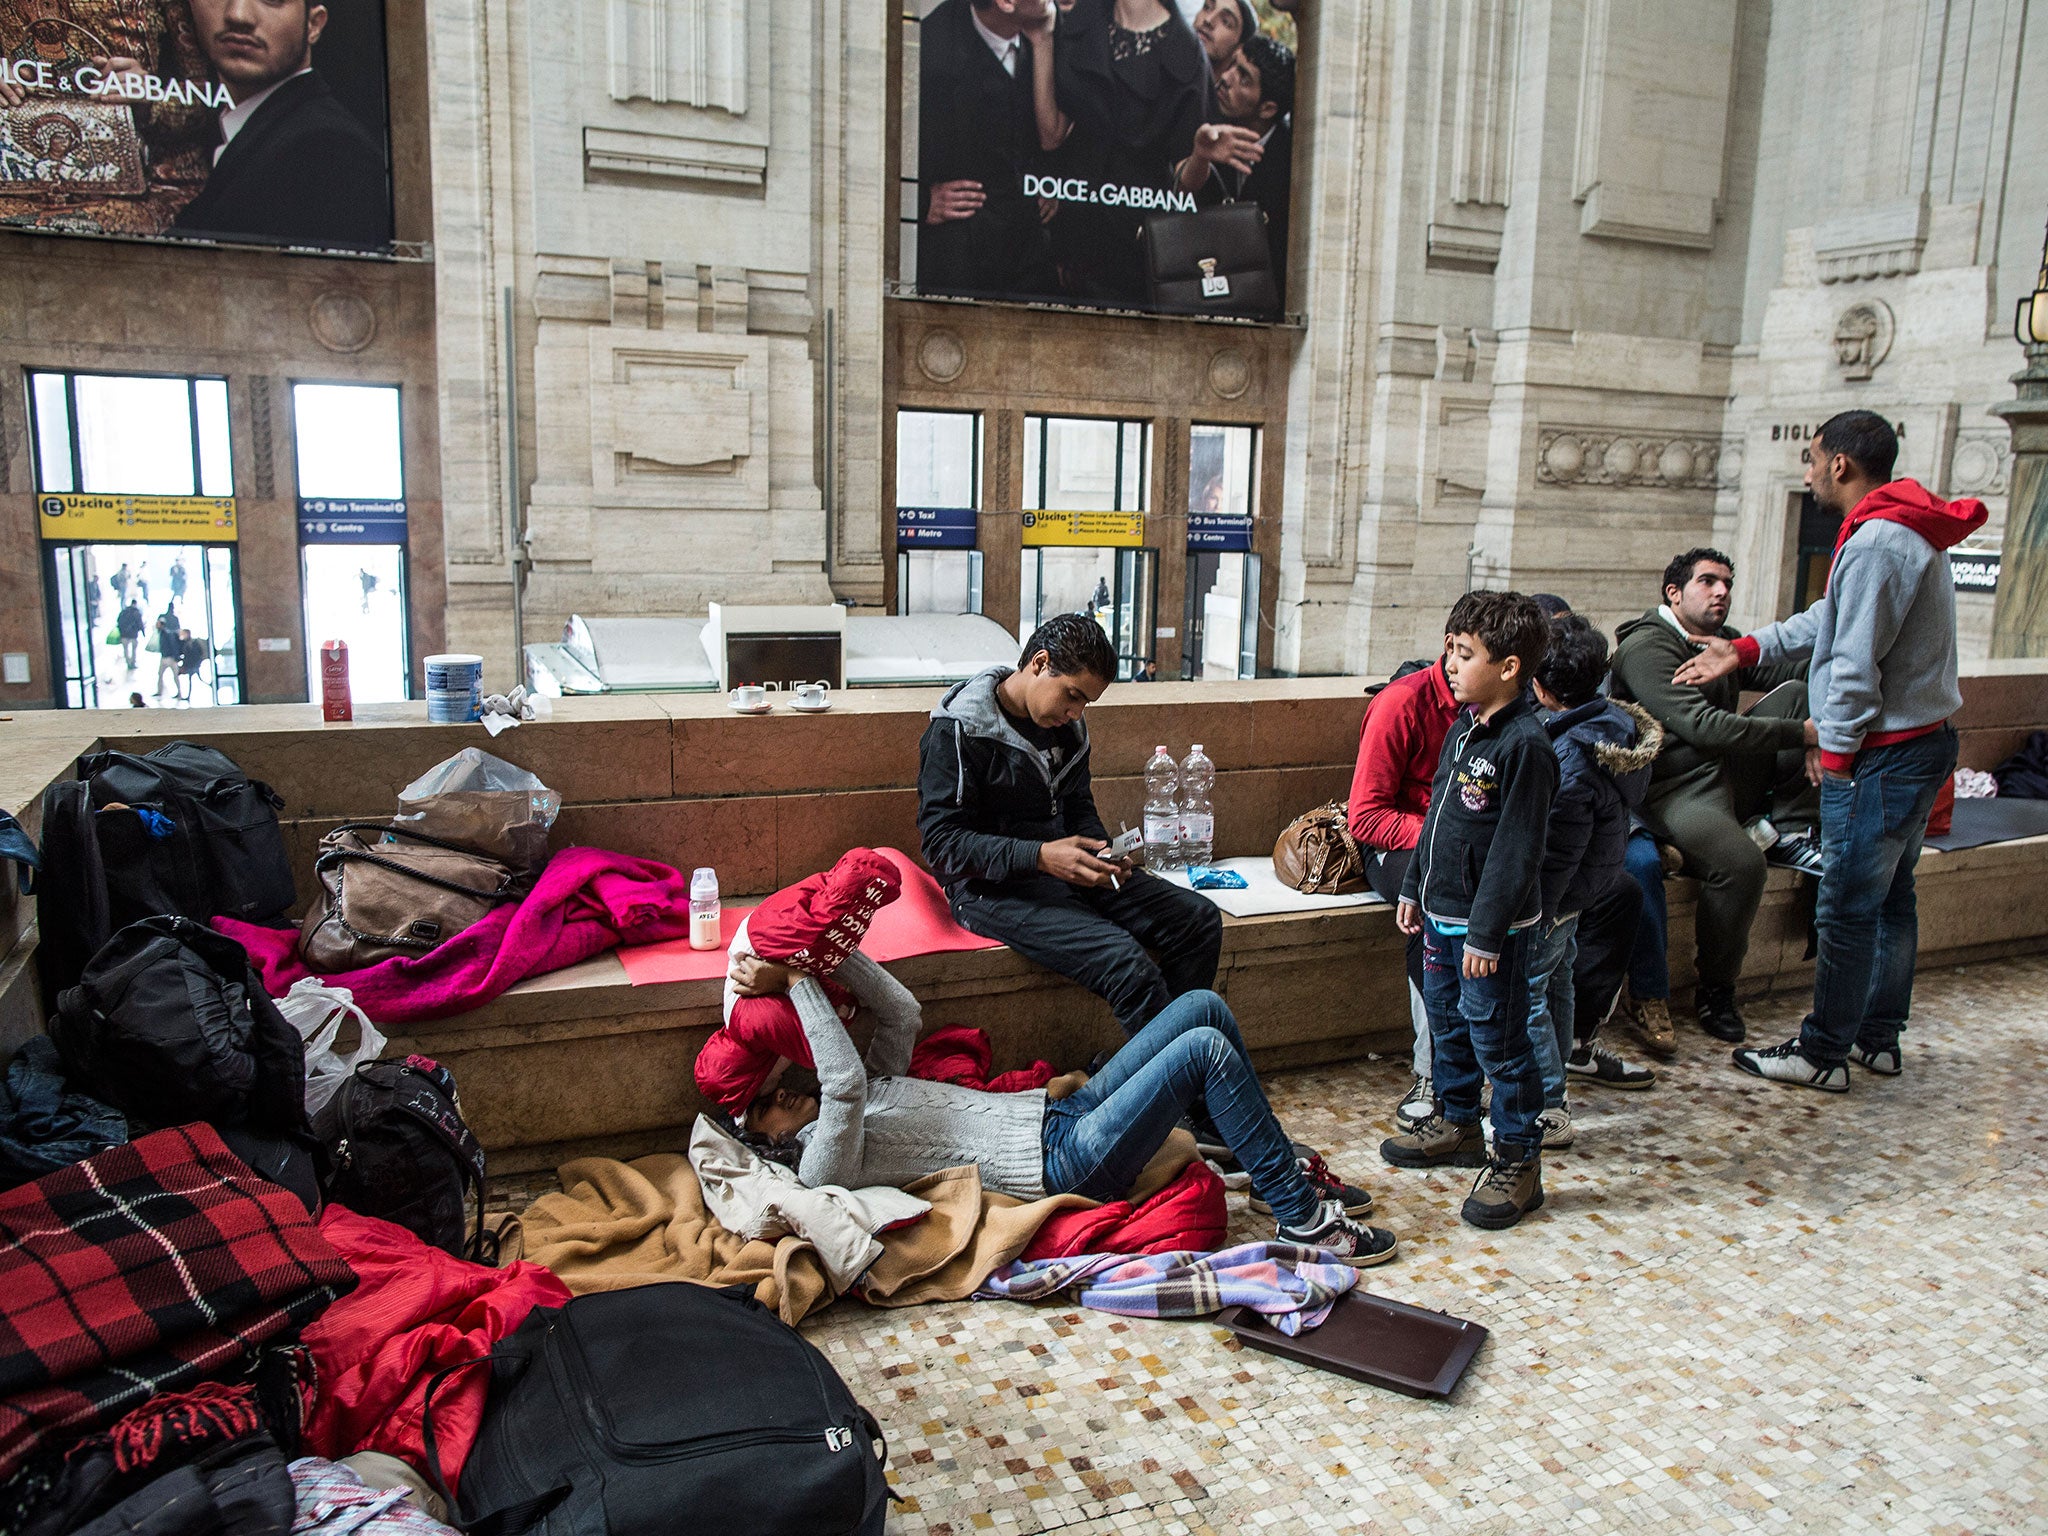 Syrian refugees wait at Milan’s Central train station, hoping to reach northern Europe. The authorities provide advice, a play area and a shuttle service to a nearby camp